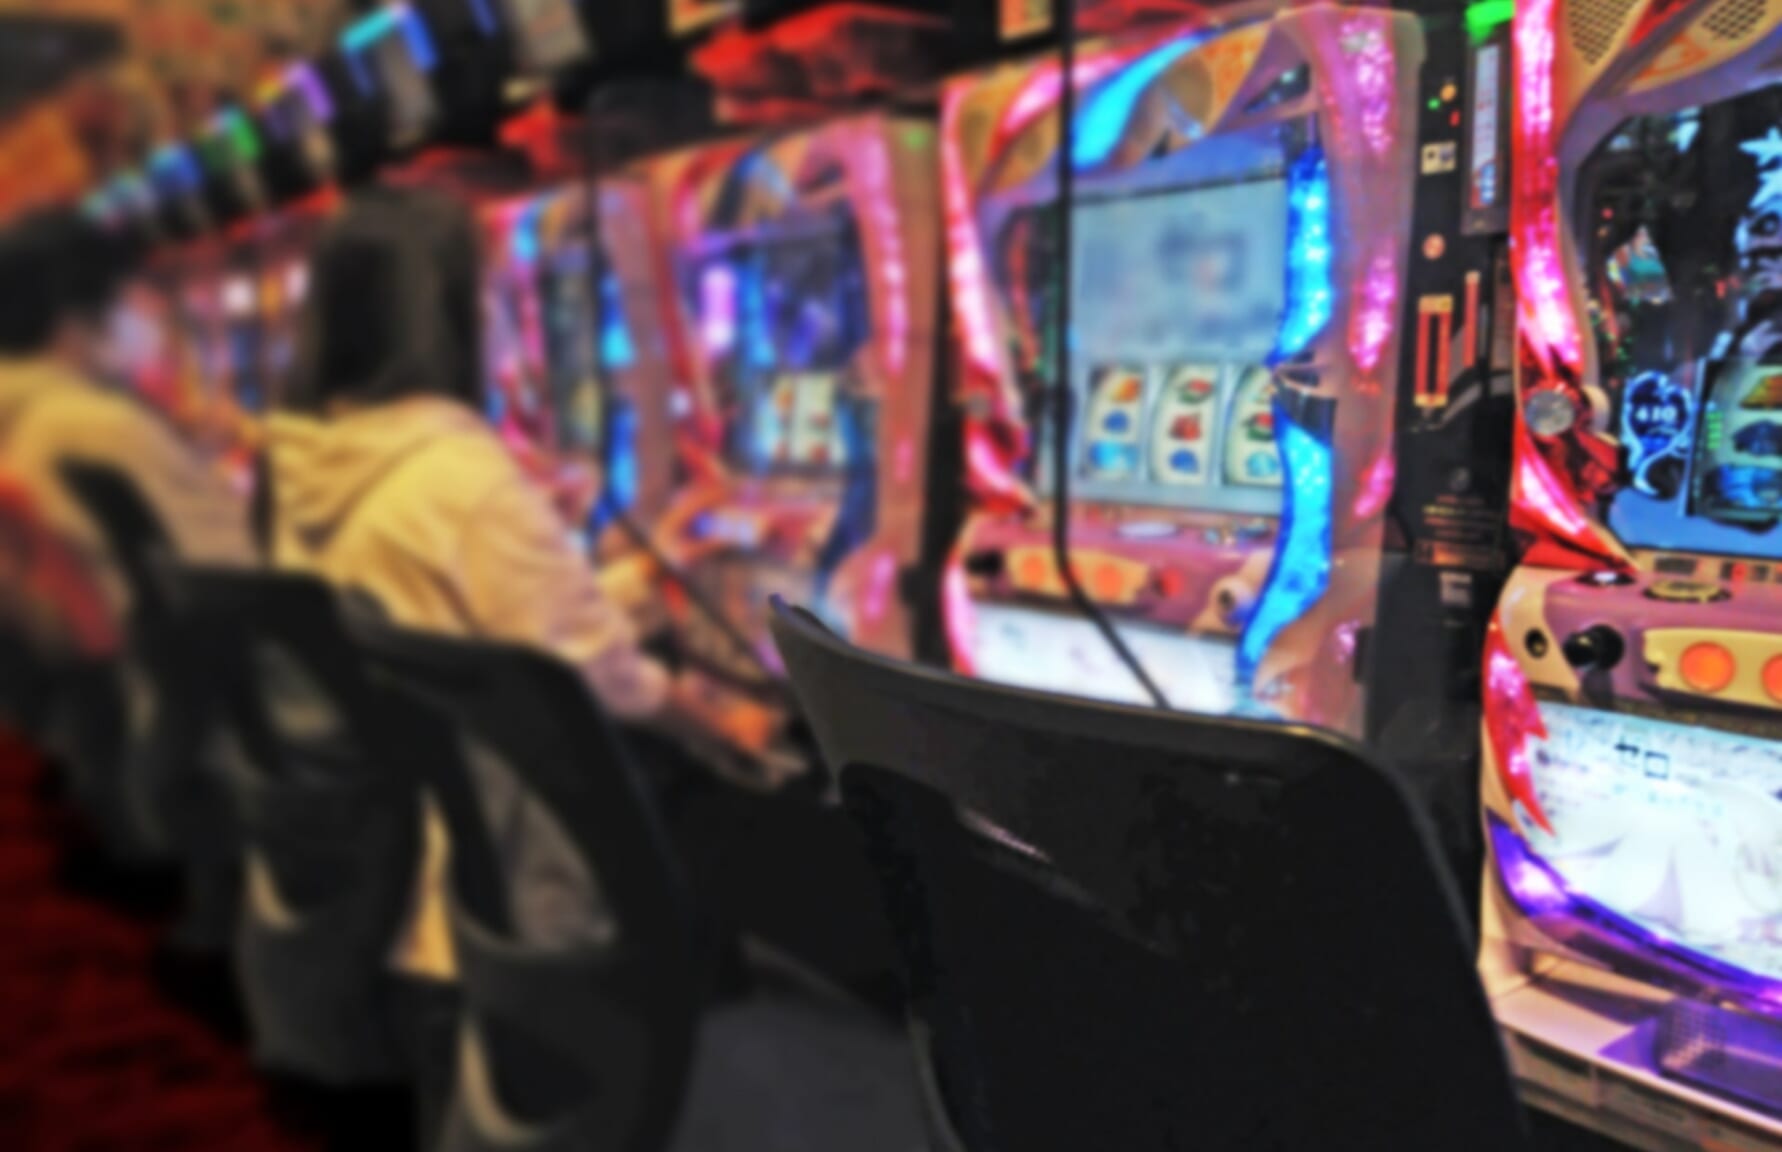 A Pachinko parlor in Japan